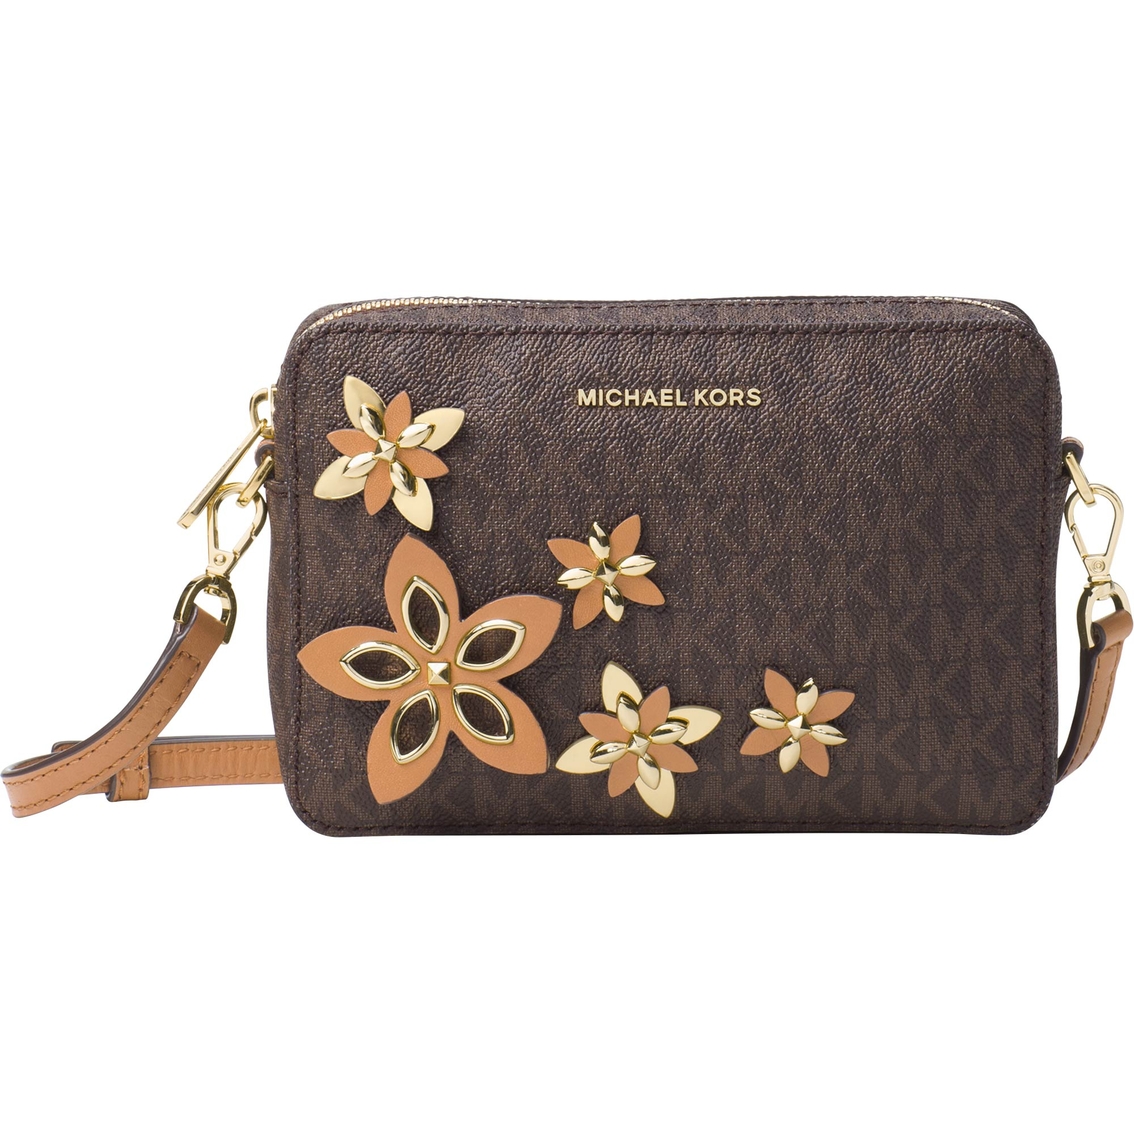 michael kors purse with flowers